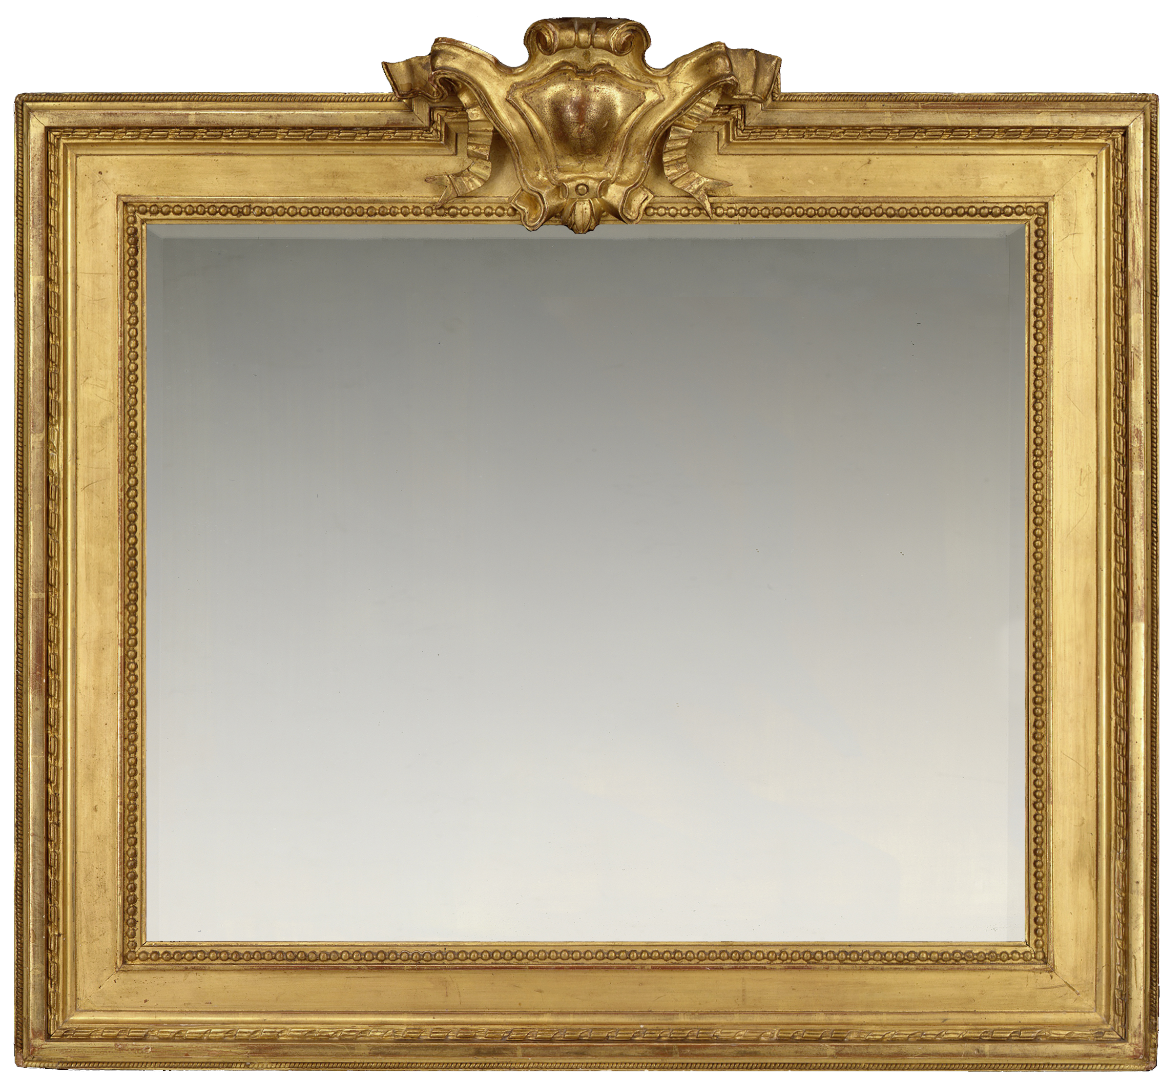 2nd & 3rd qtr 19th century French Louis XVI Revival frame